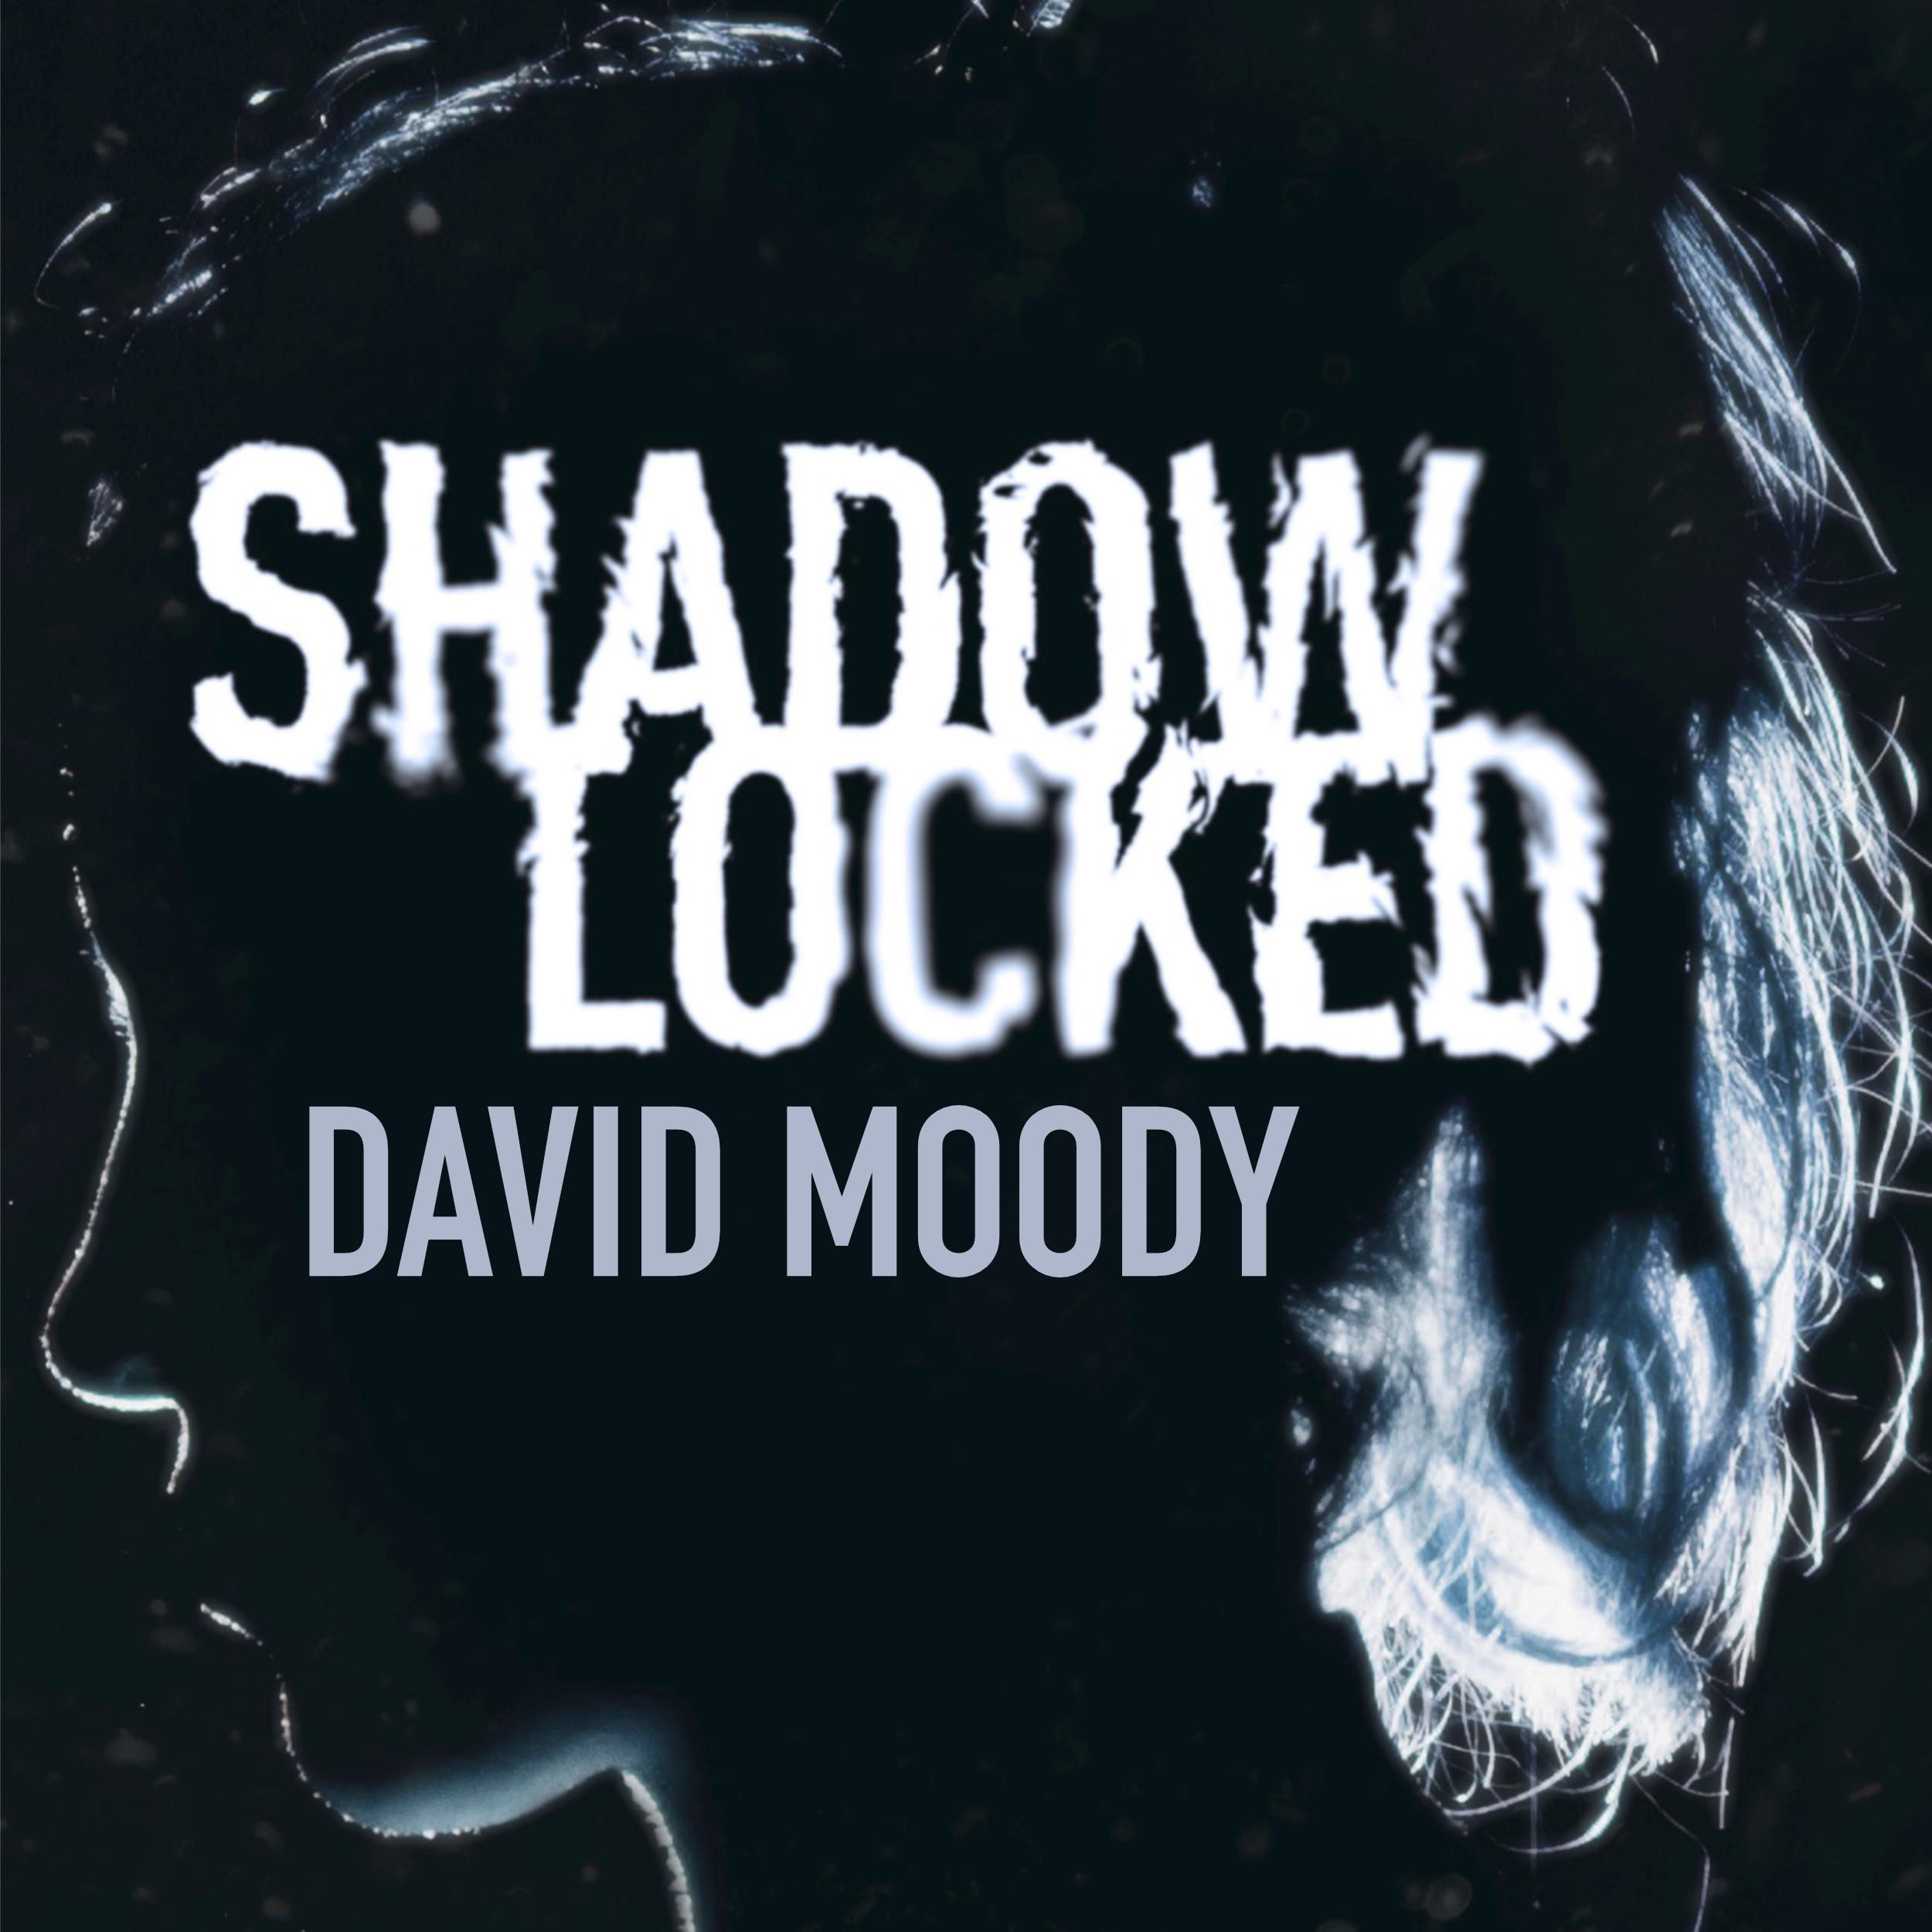 Shadowlocked audiobook by David Moody, narrated by Aubrey Parsons